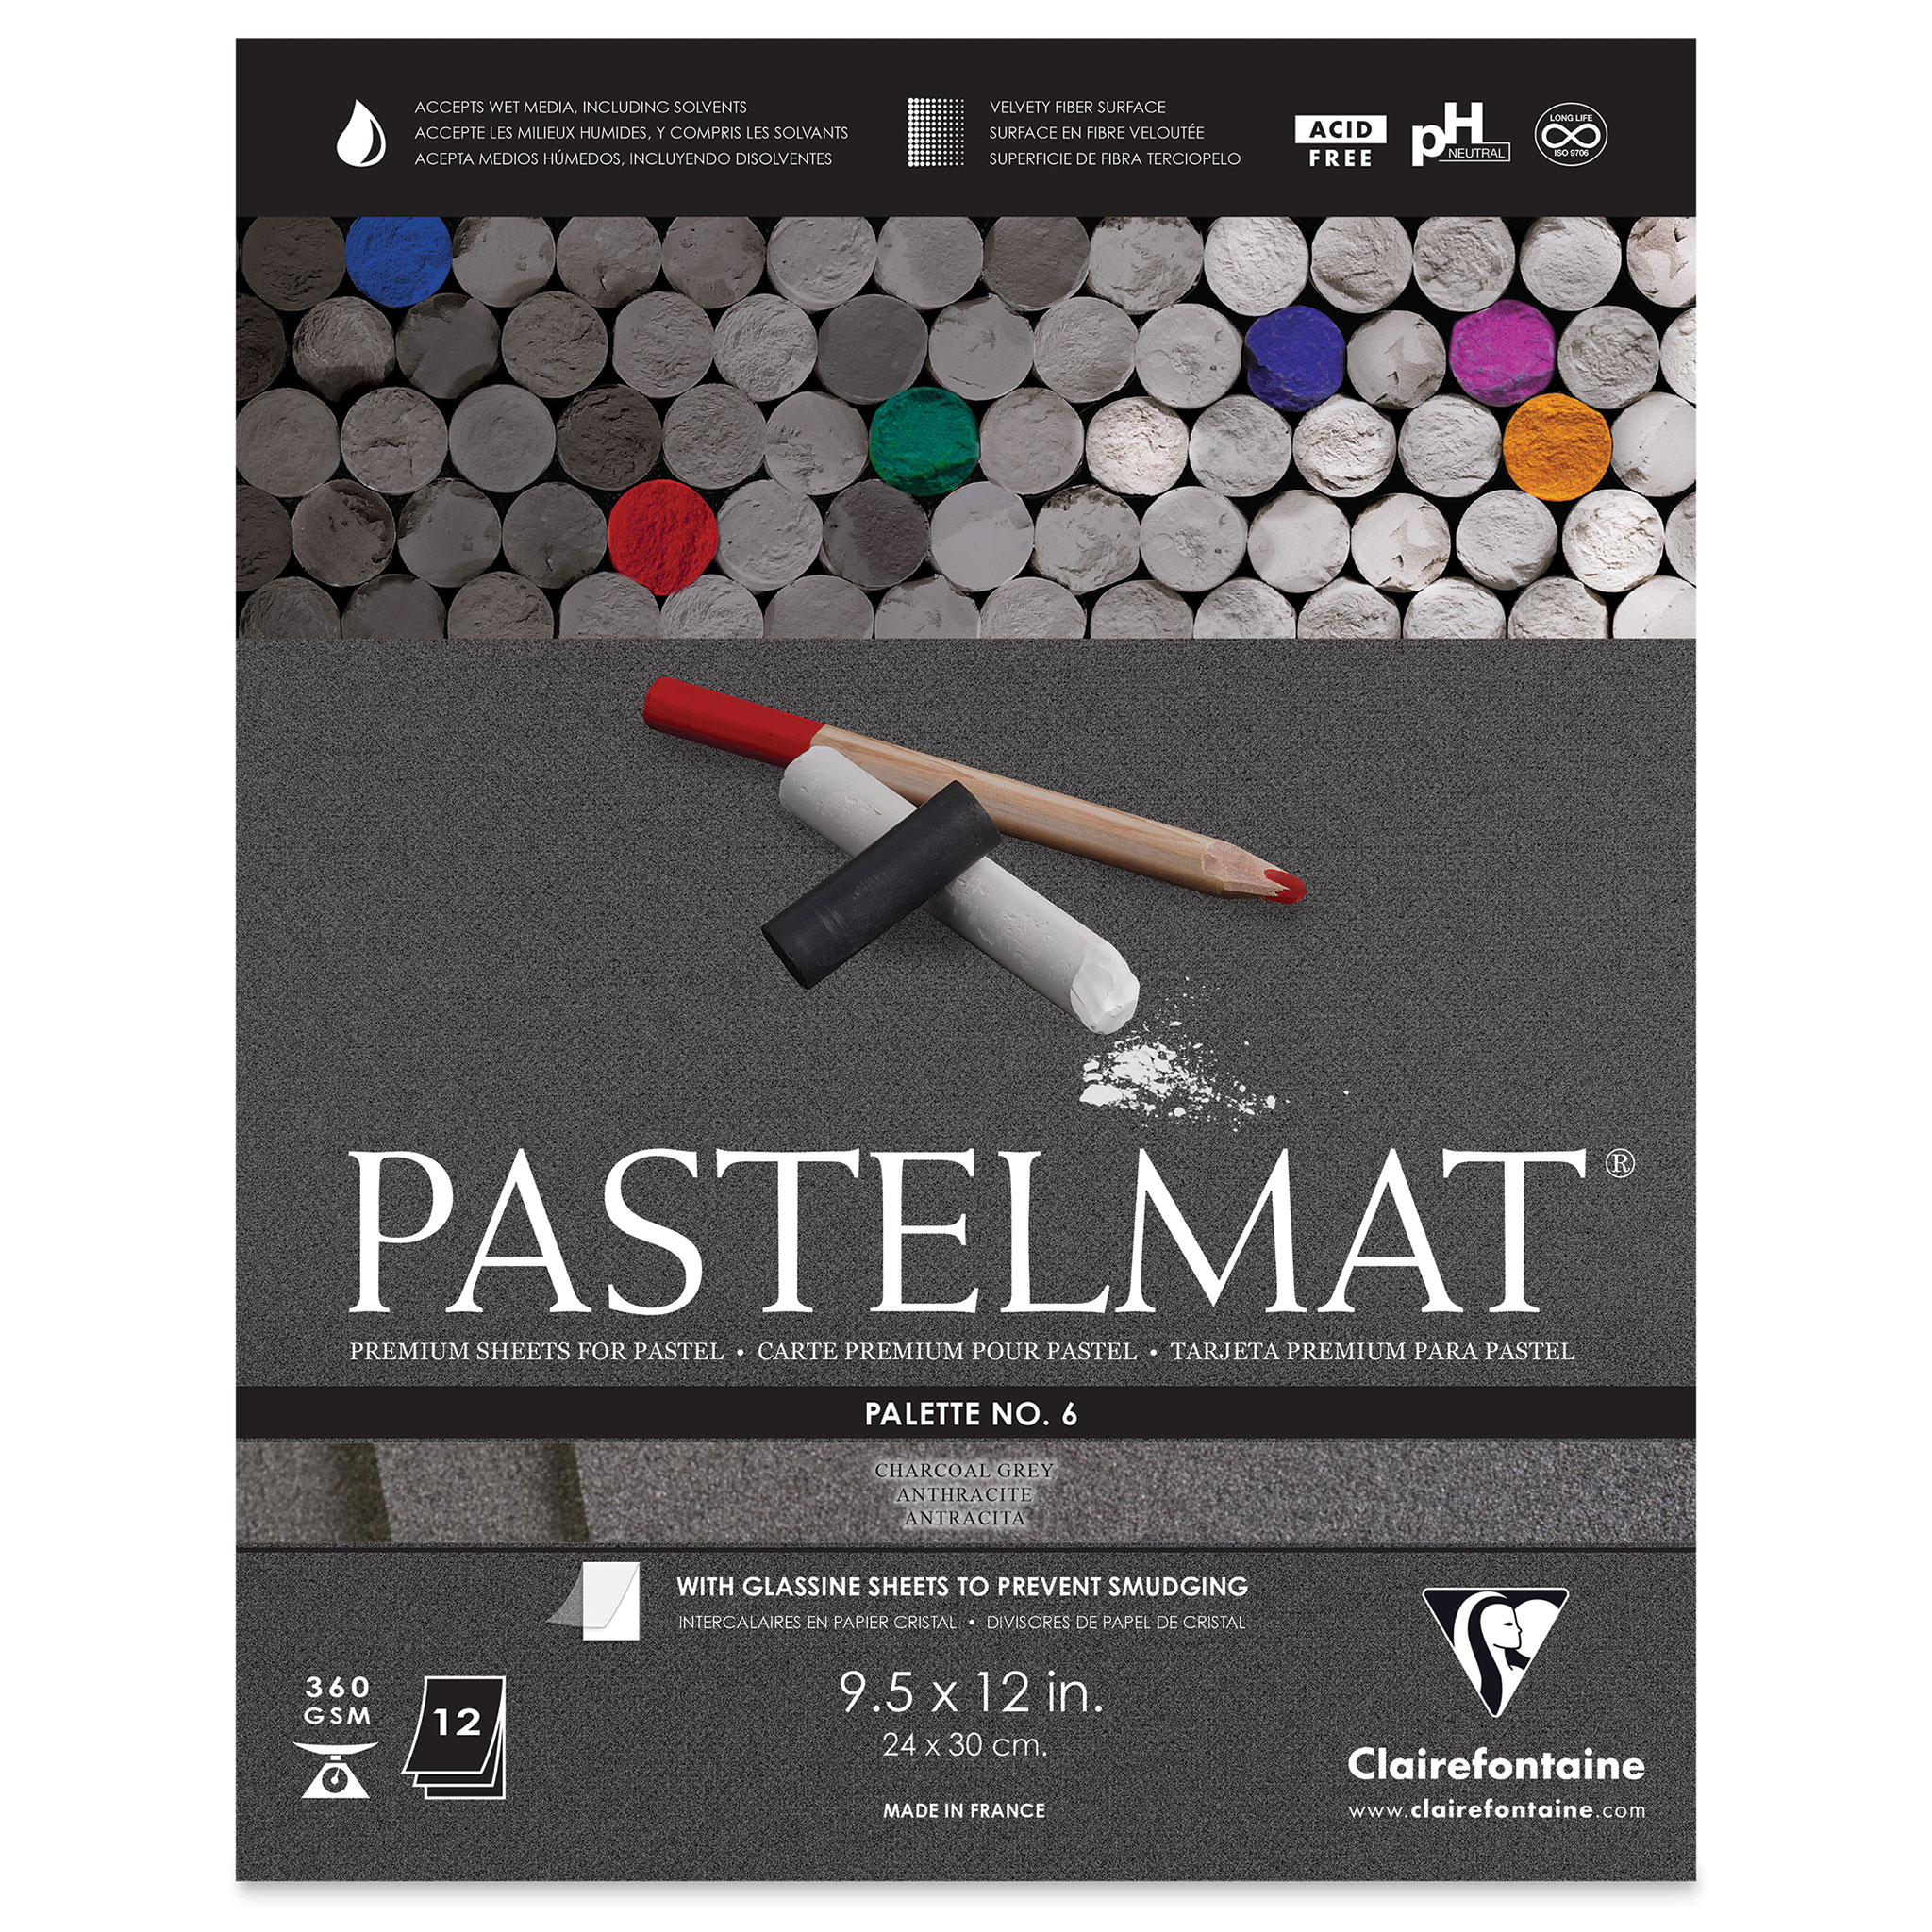 Clairefontaine Pastelmat Sheets